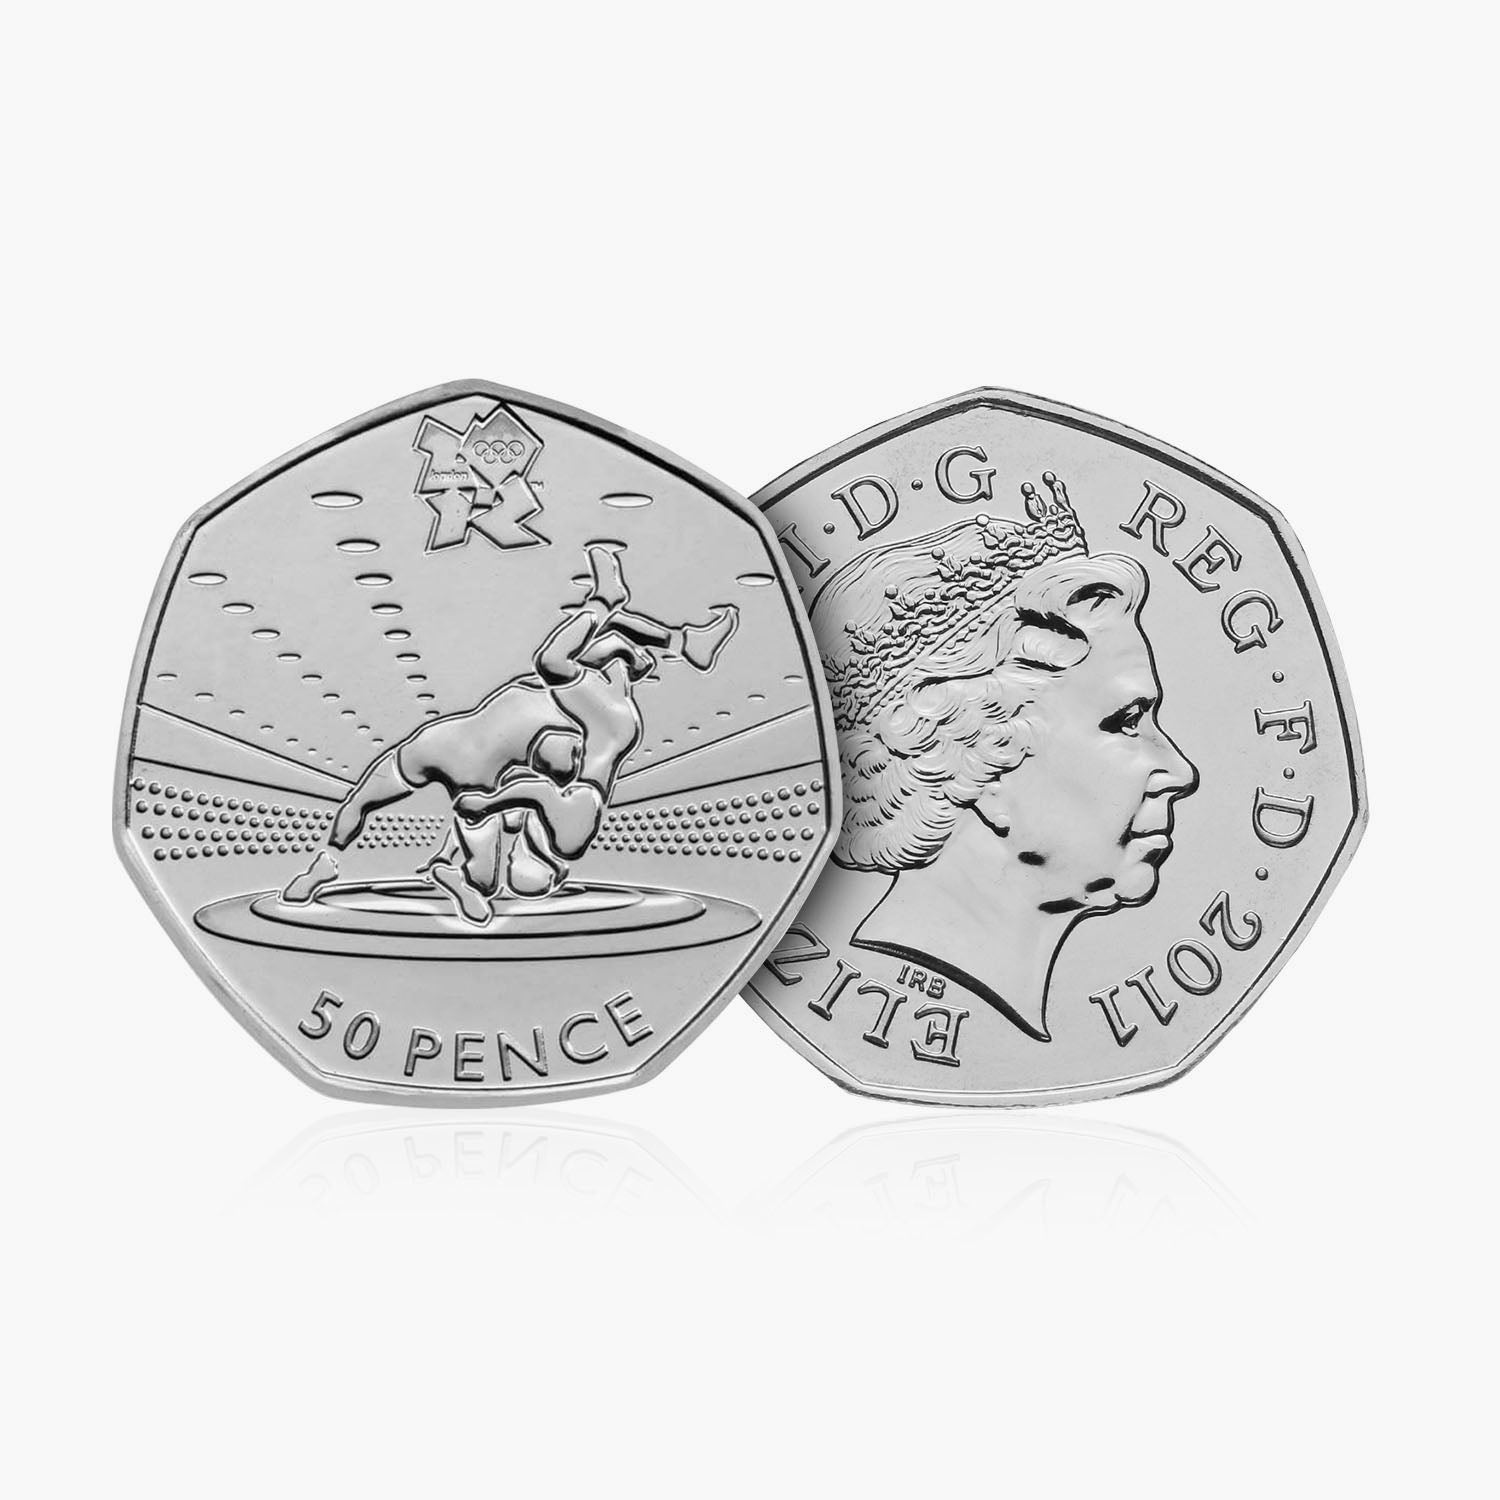 2011 Circulated Olympics - Wrestling 50p Coin